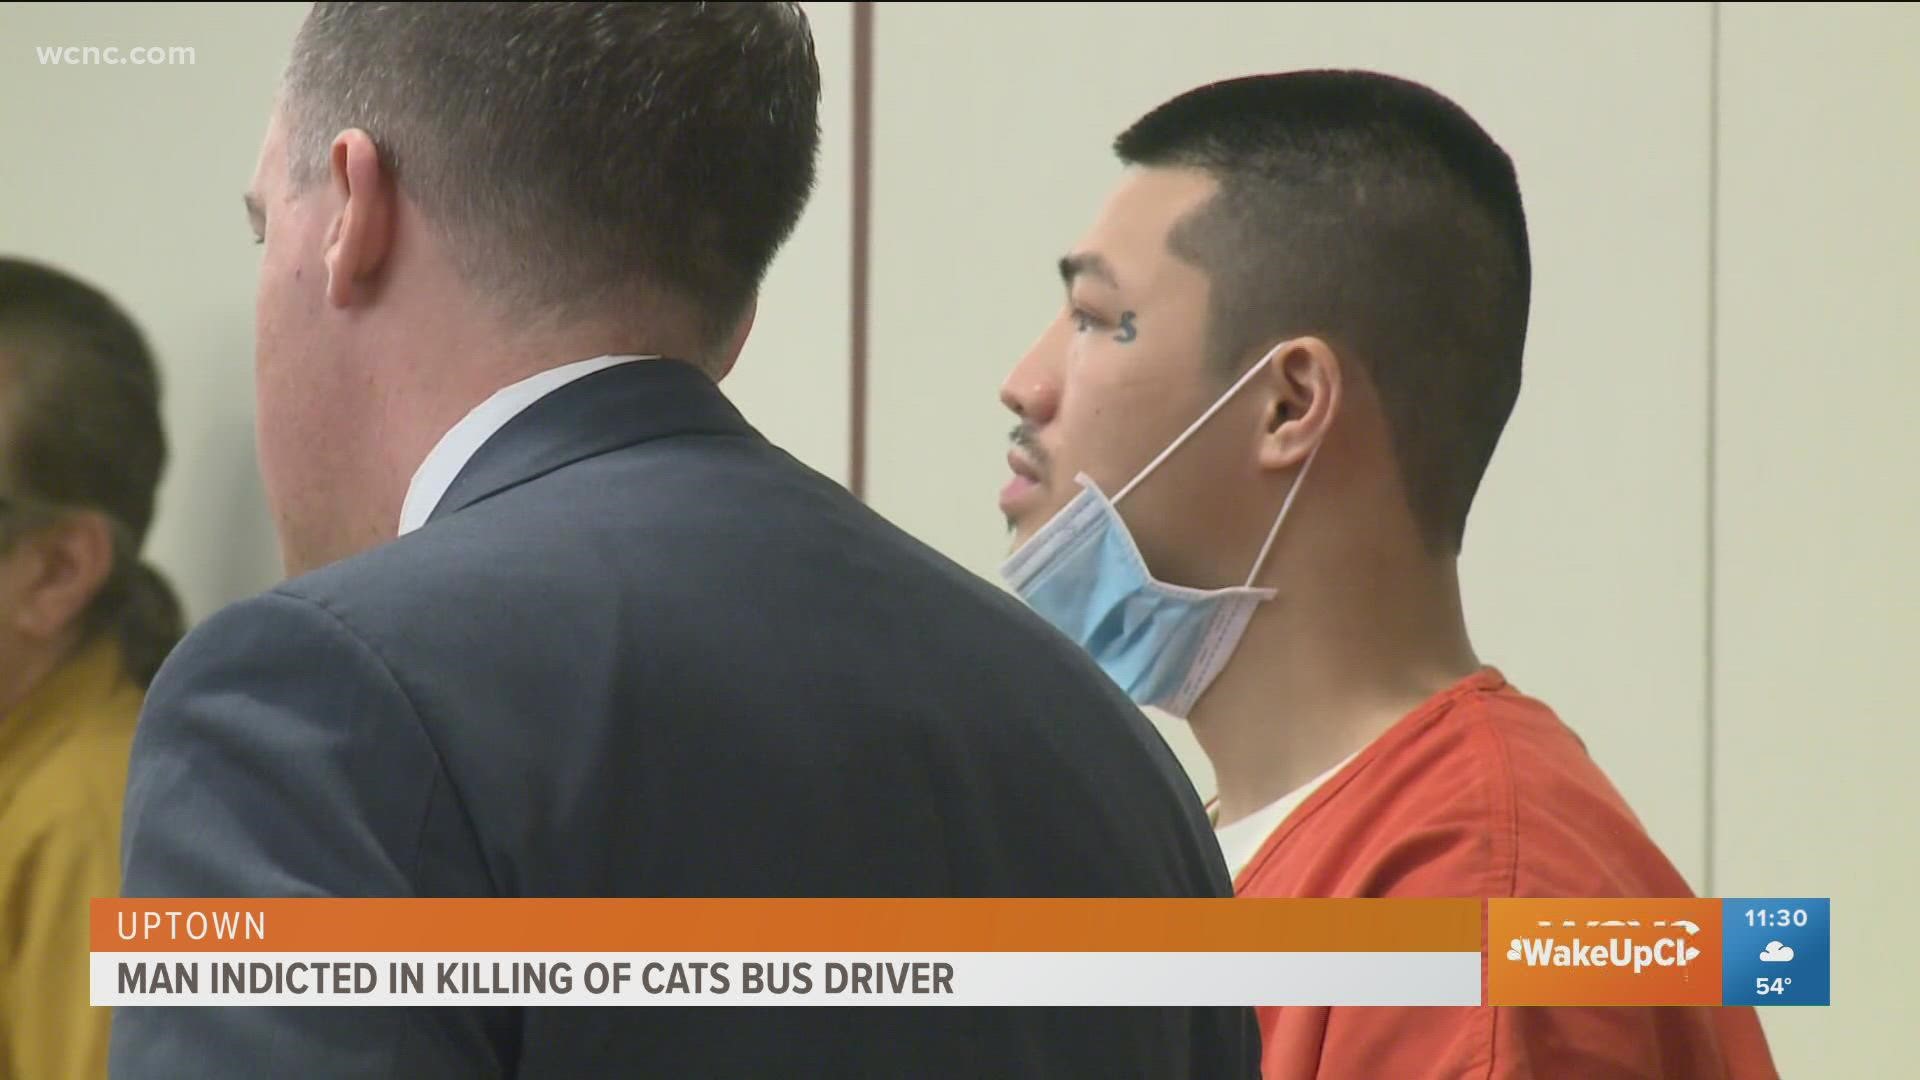 Darian Dru Thavychith was indicted by a grand jury on two charges, including murder, in connection with the killing of CATS driver Ethan Rivera in Uptown.